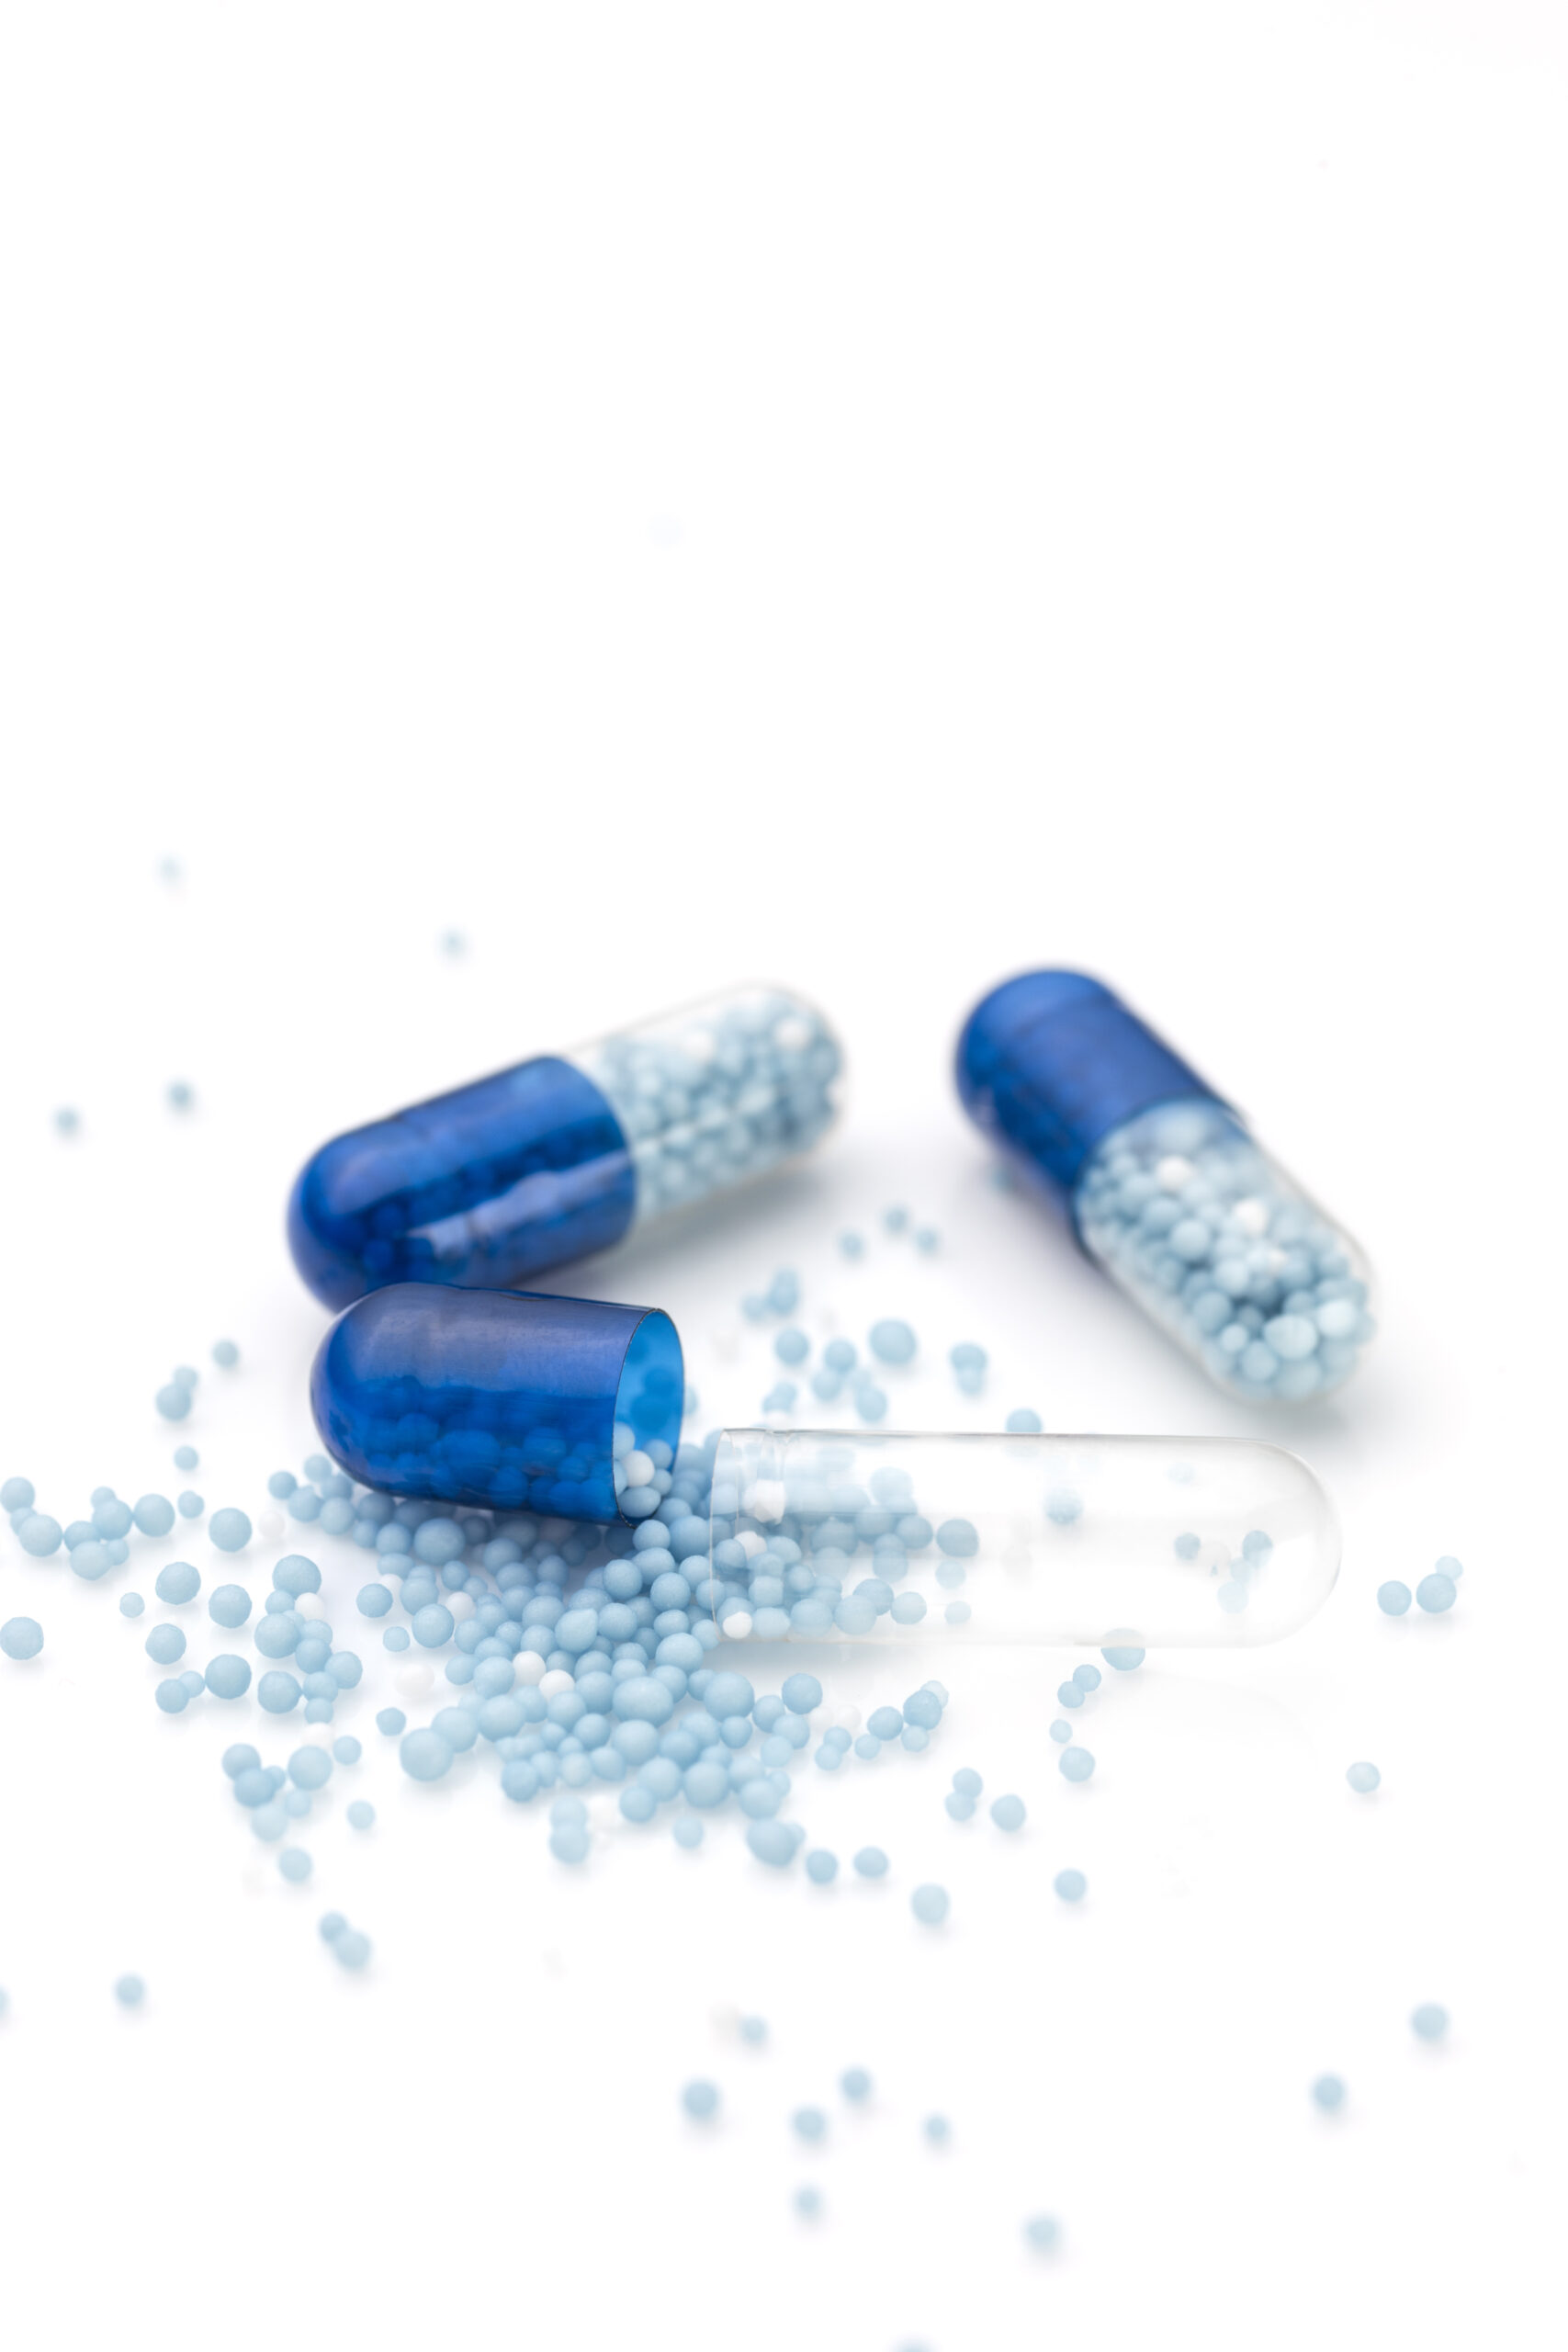 Blue capsules and pills background